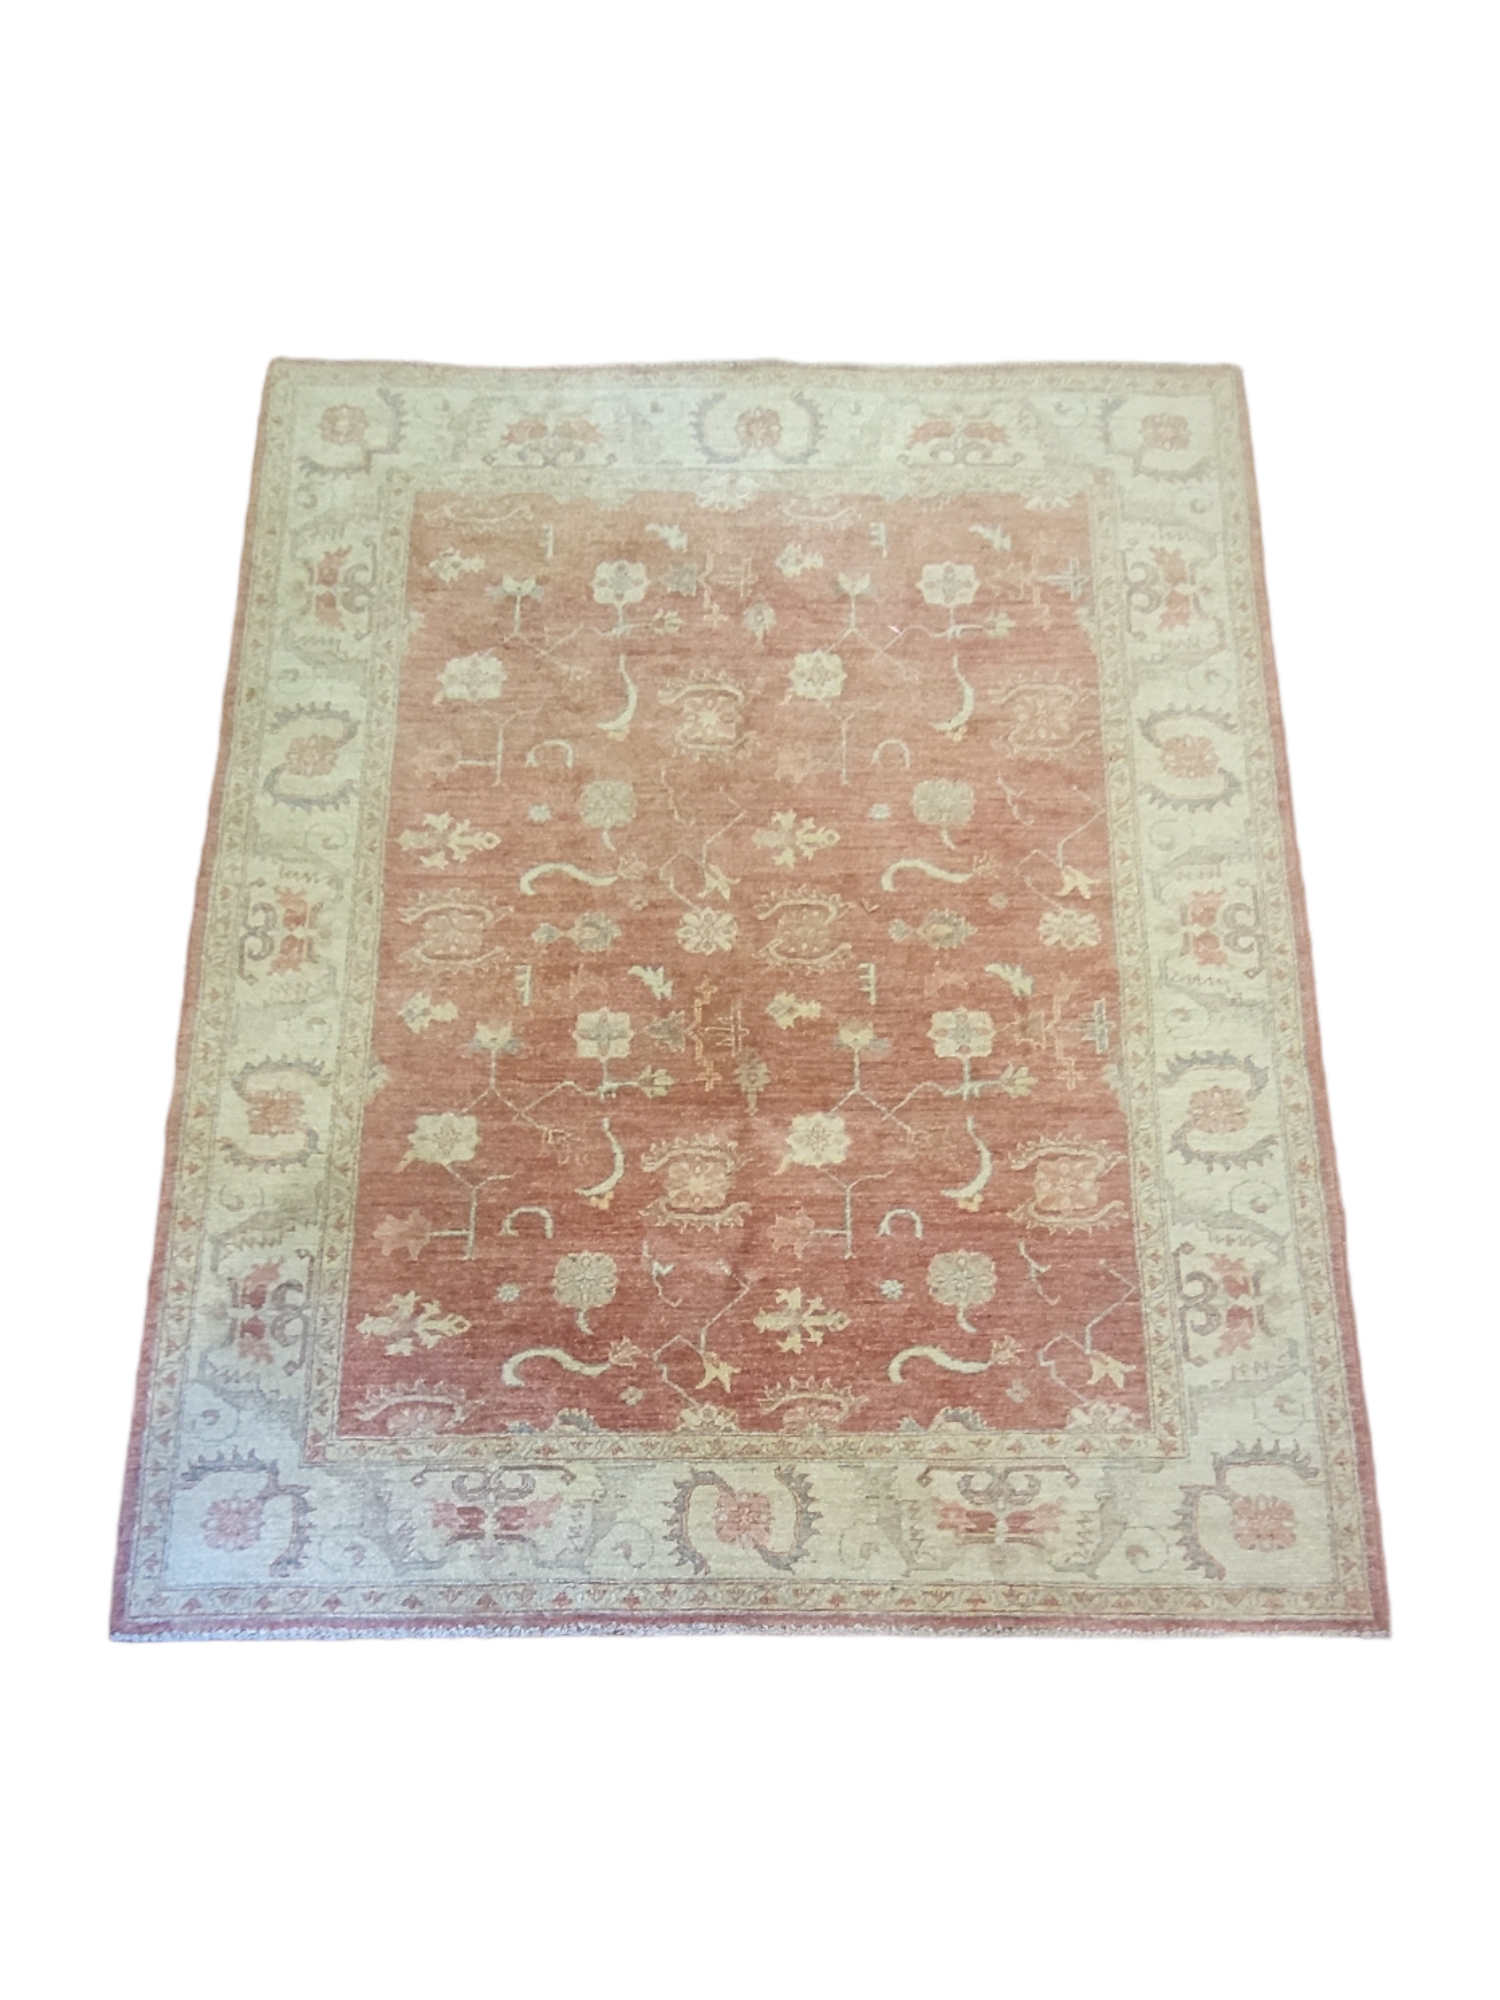 A PERSIAN WOOLLEN RUG, hand woven with floral decoartion on amber central field on oatmeal cream